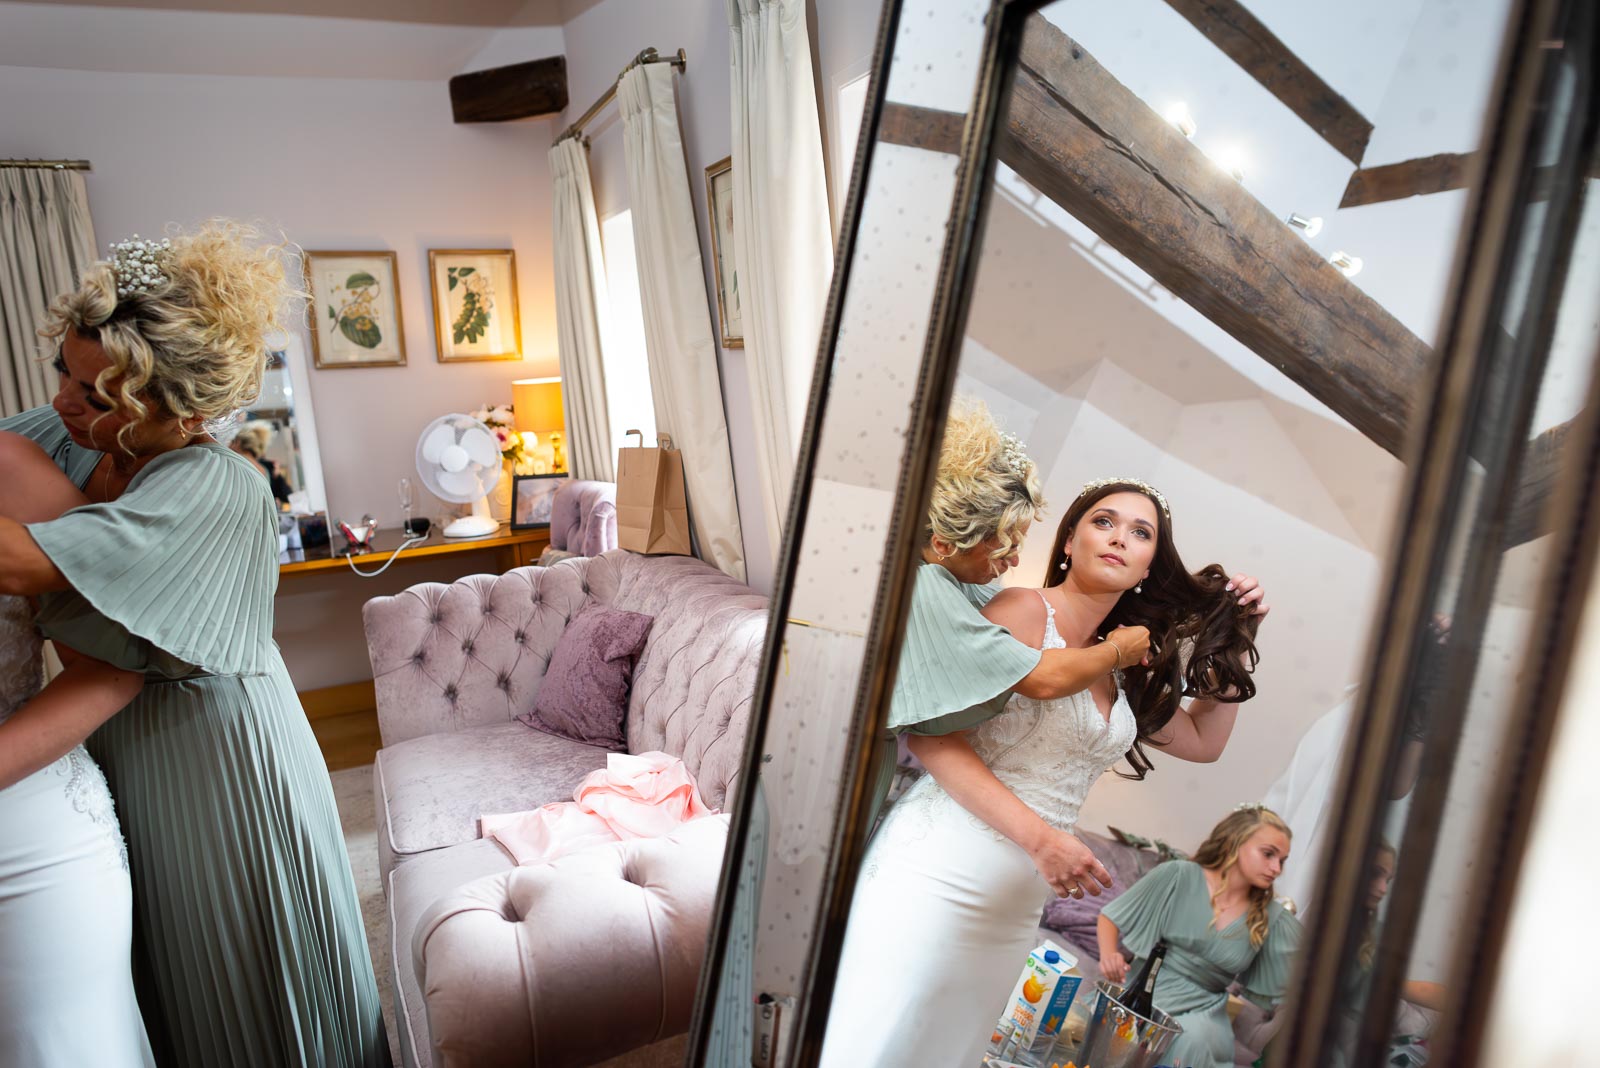 Wedding Photographer for Natalie and Dean at Pelham House in Lewes